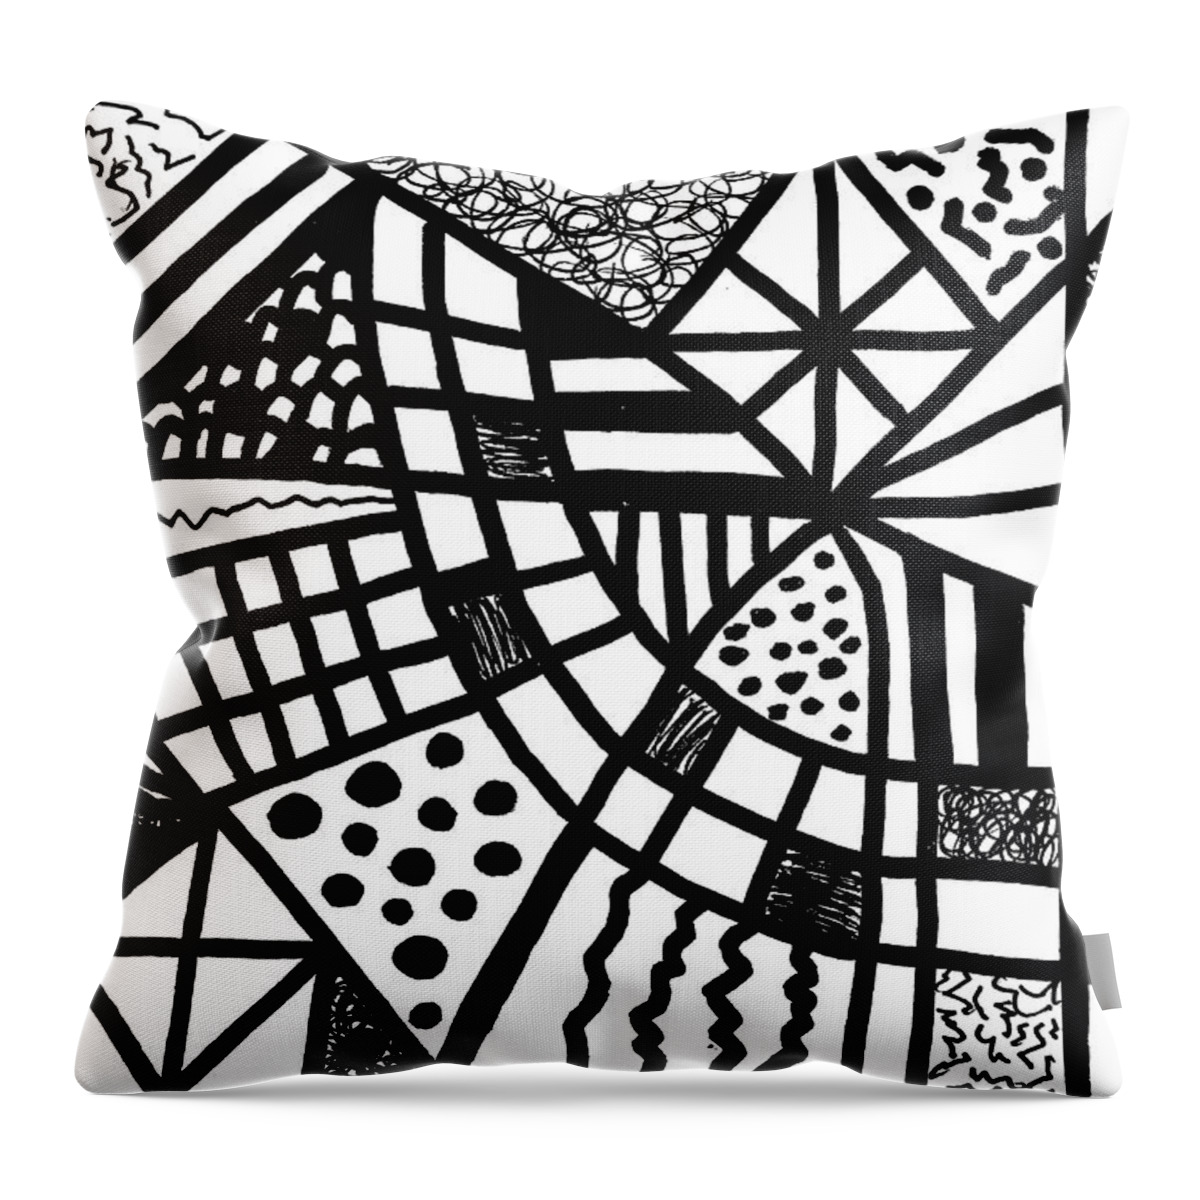 Original Drawing Throw Pillow featuring the drawing Night And Day 13 by Susan Schanerman